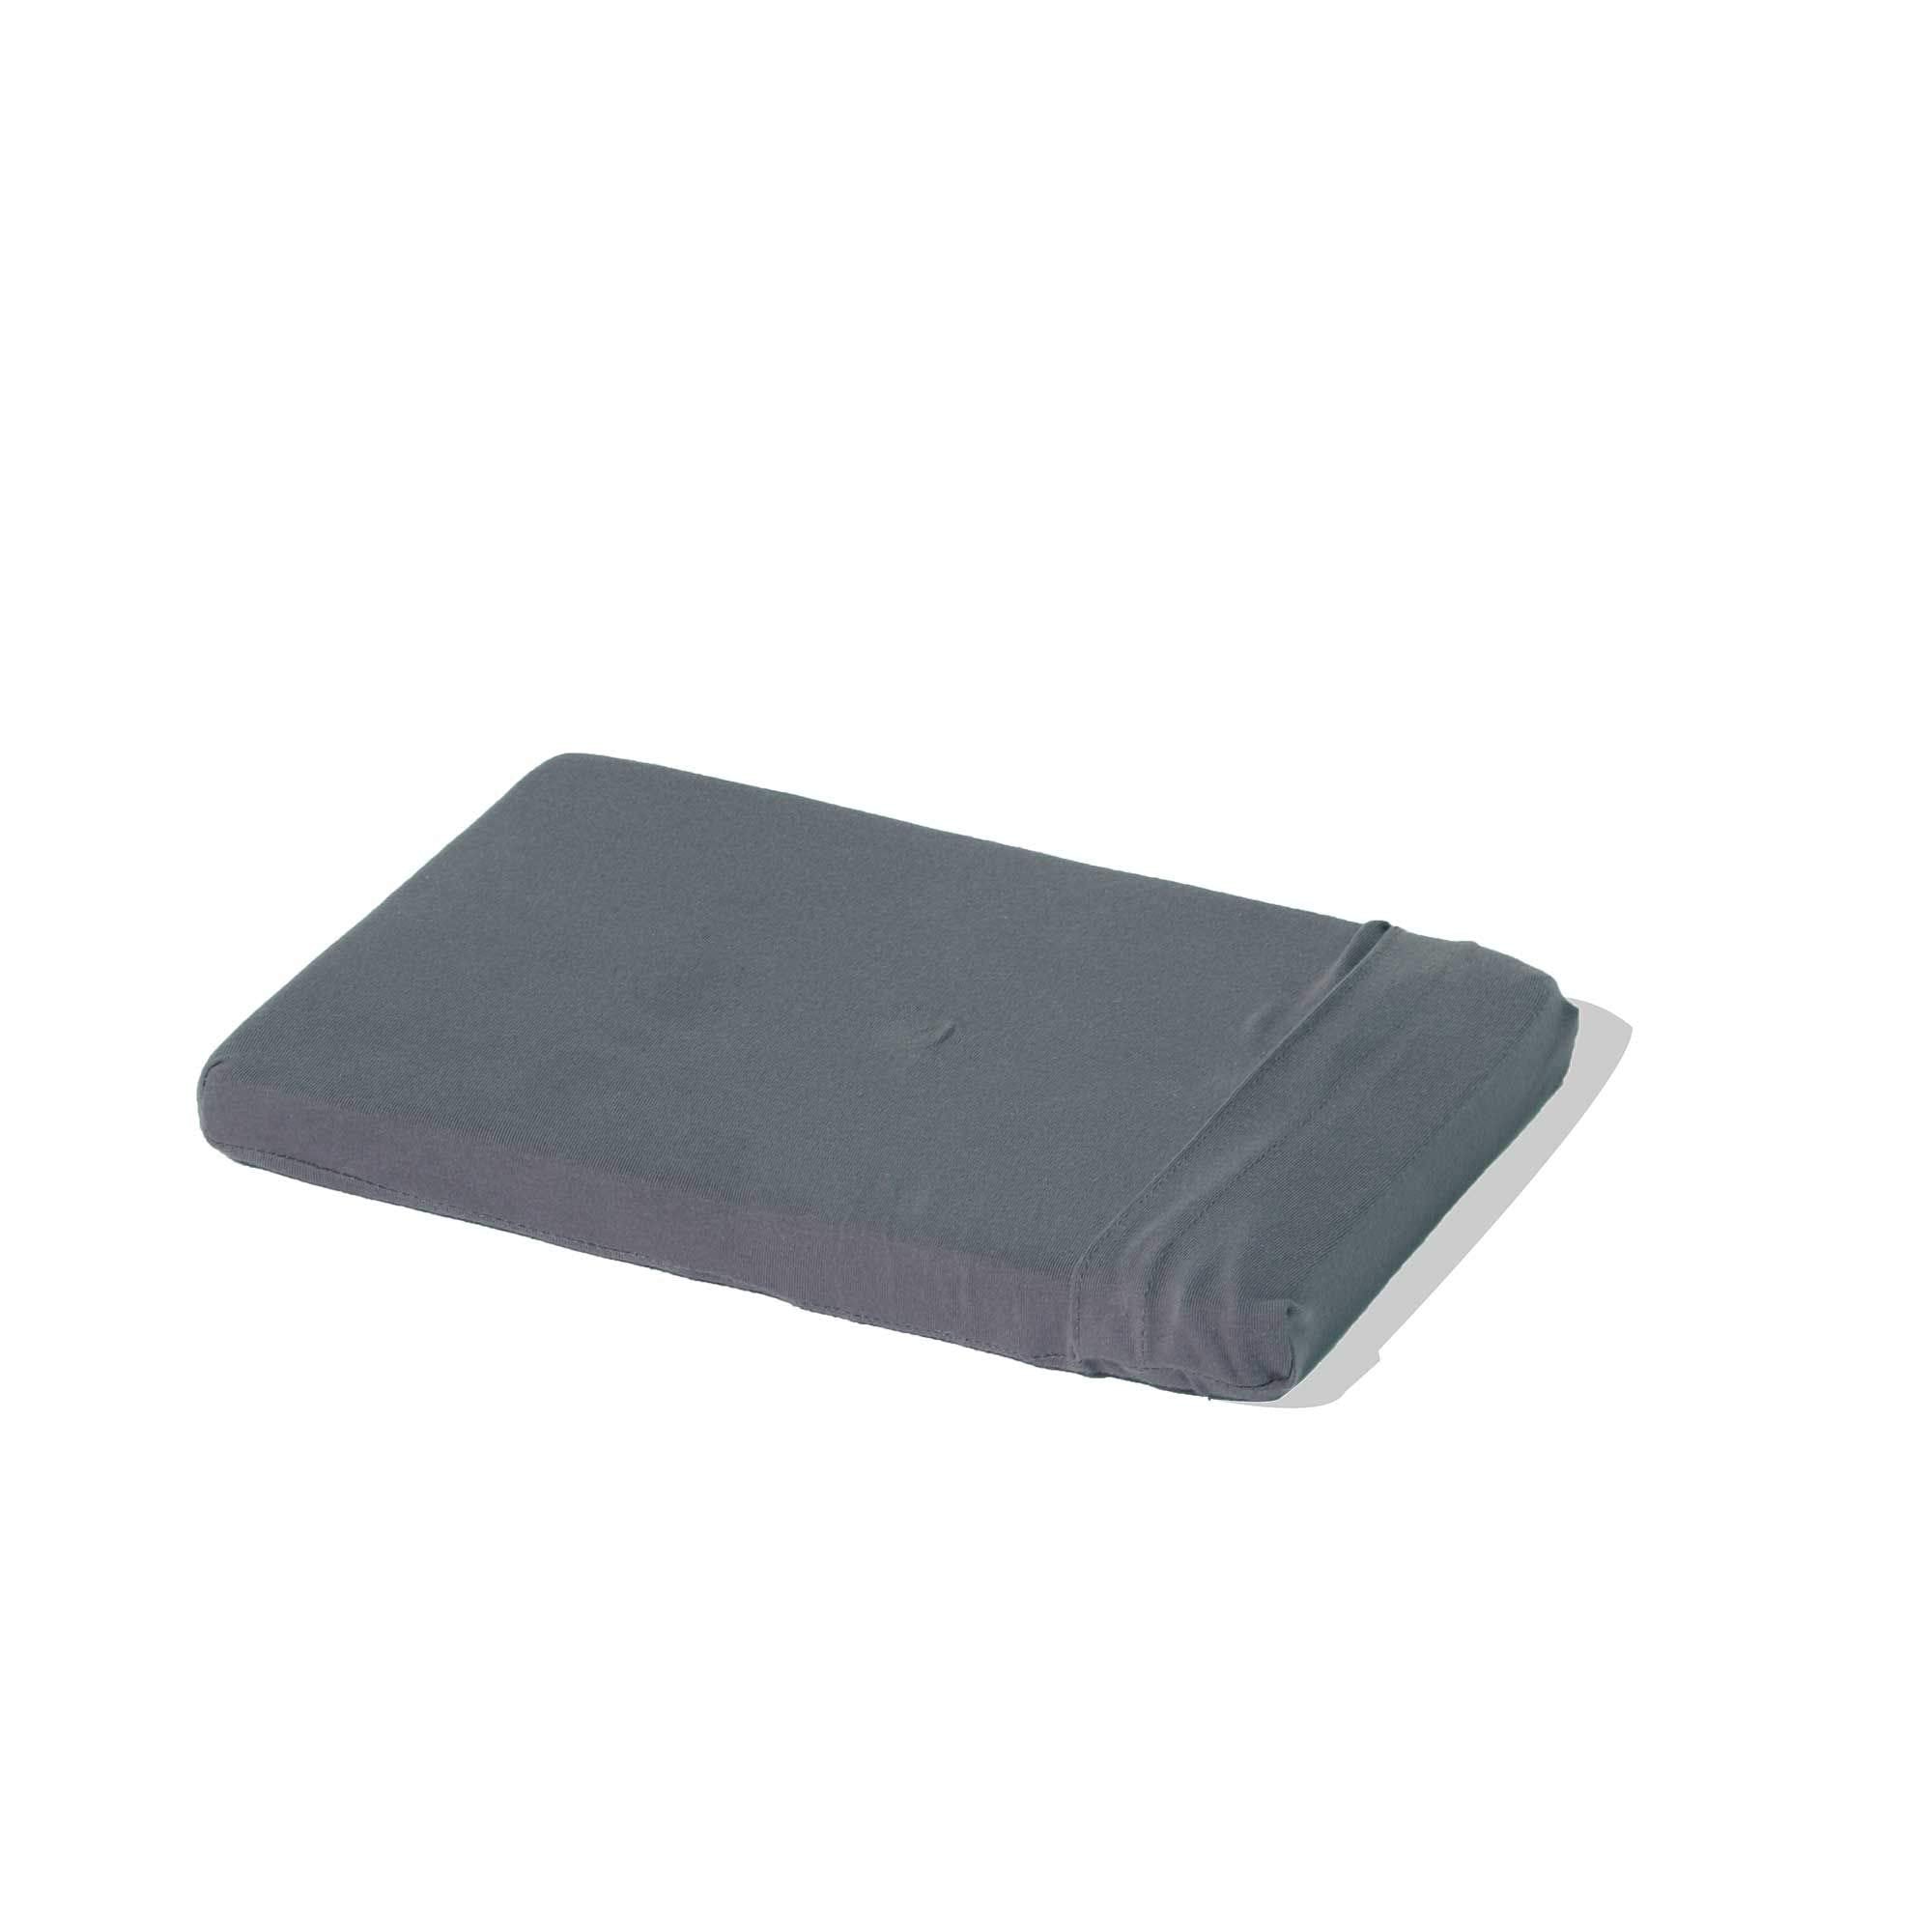 SuperBrace Pilates Yoga GREY Head Pad 1 Inch 2.5cm Thick Cushion Perfect for Fitness Exercise Gym Workout